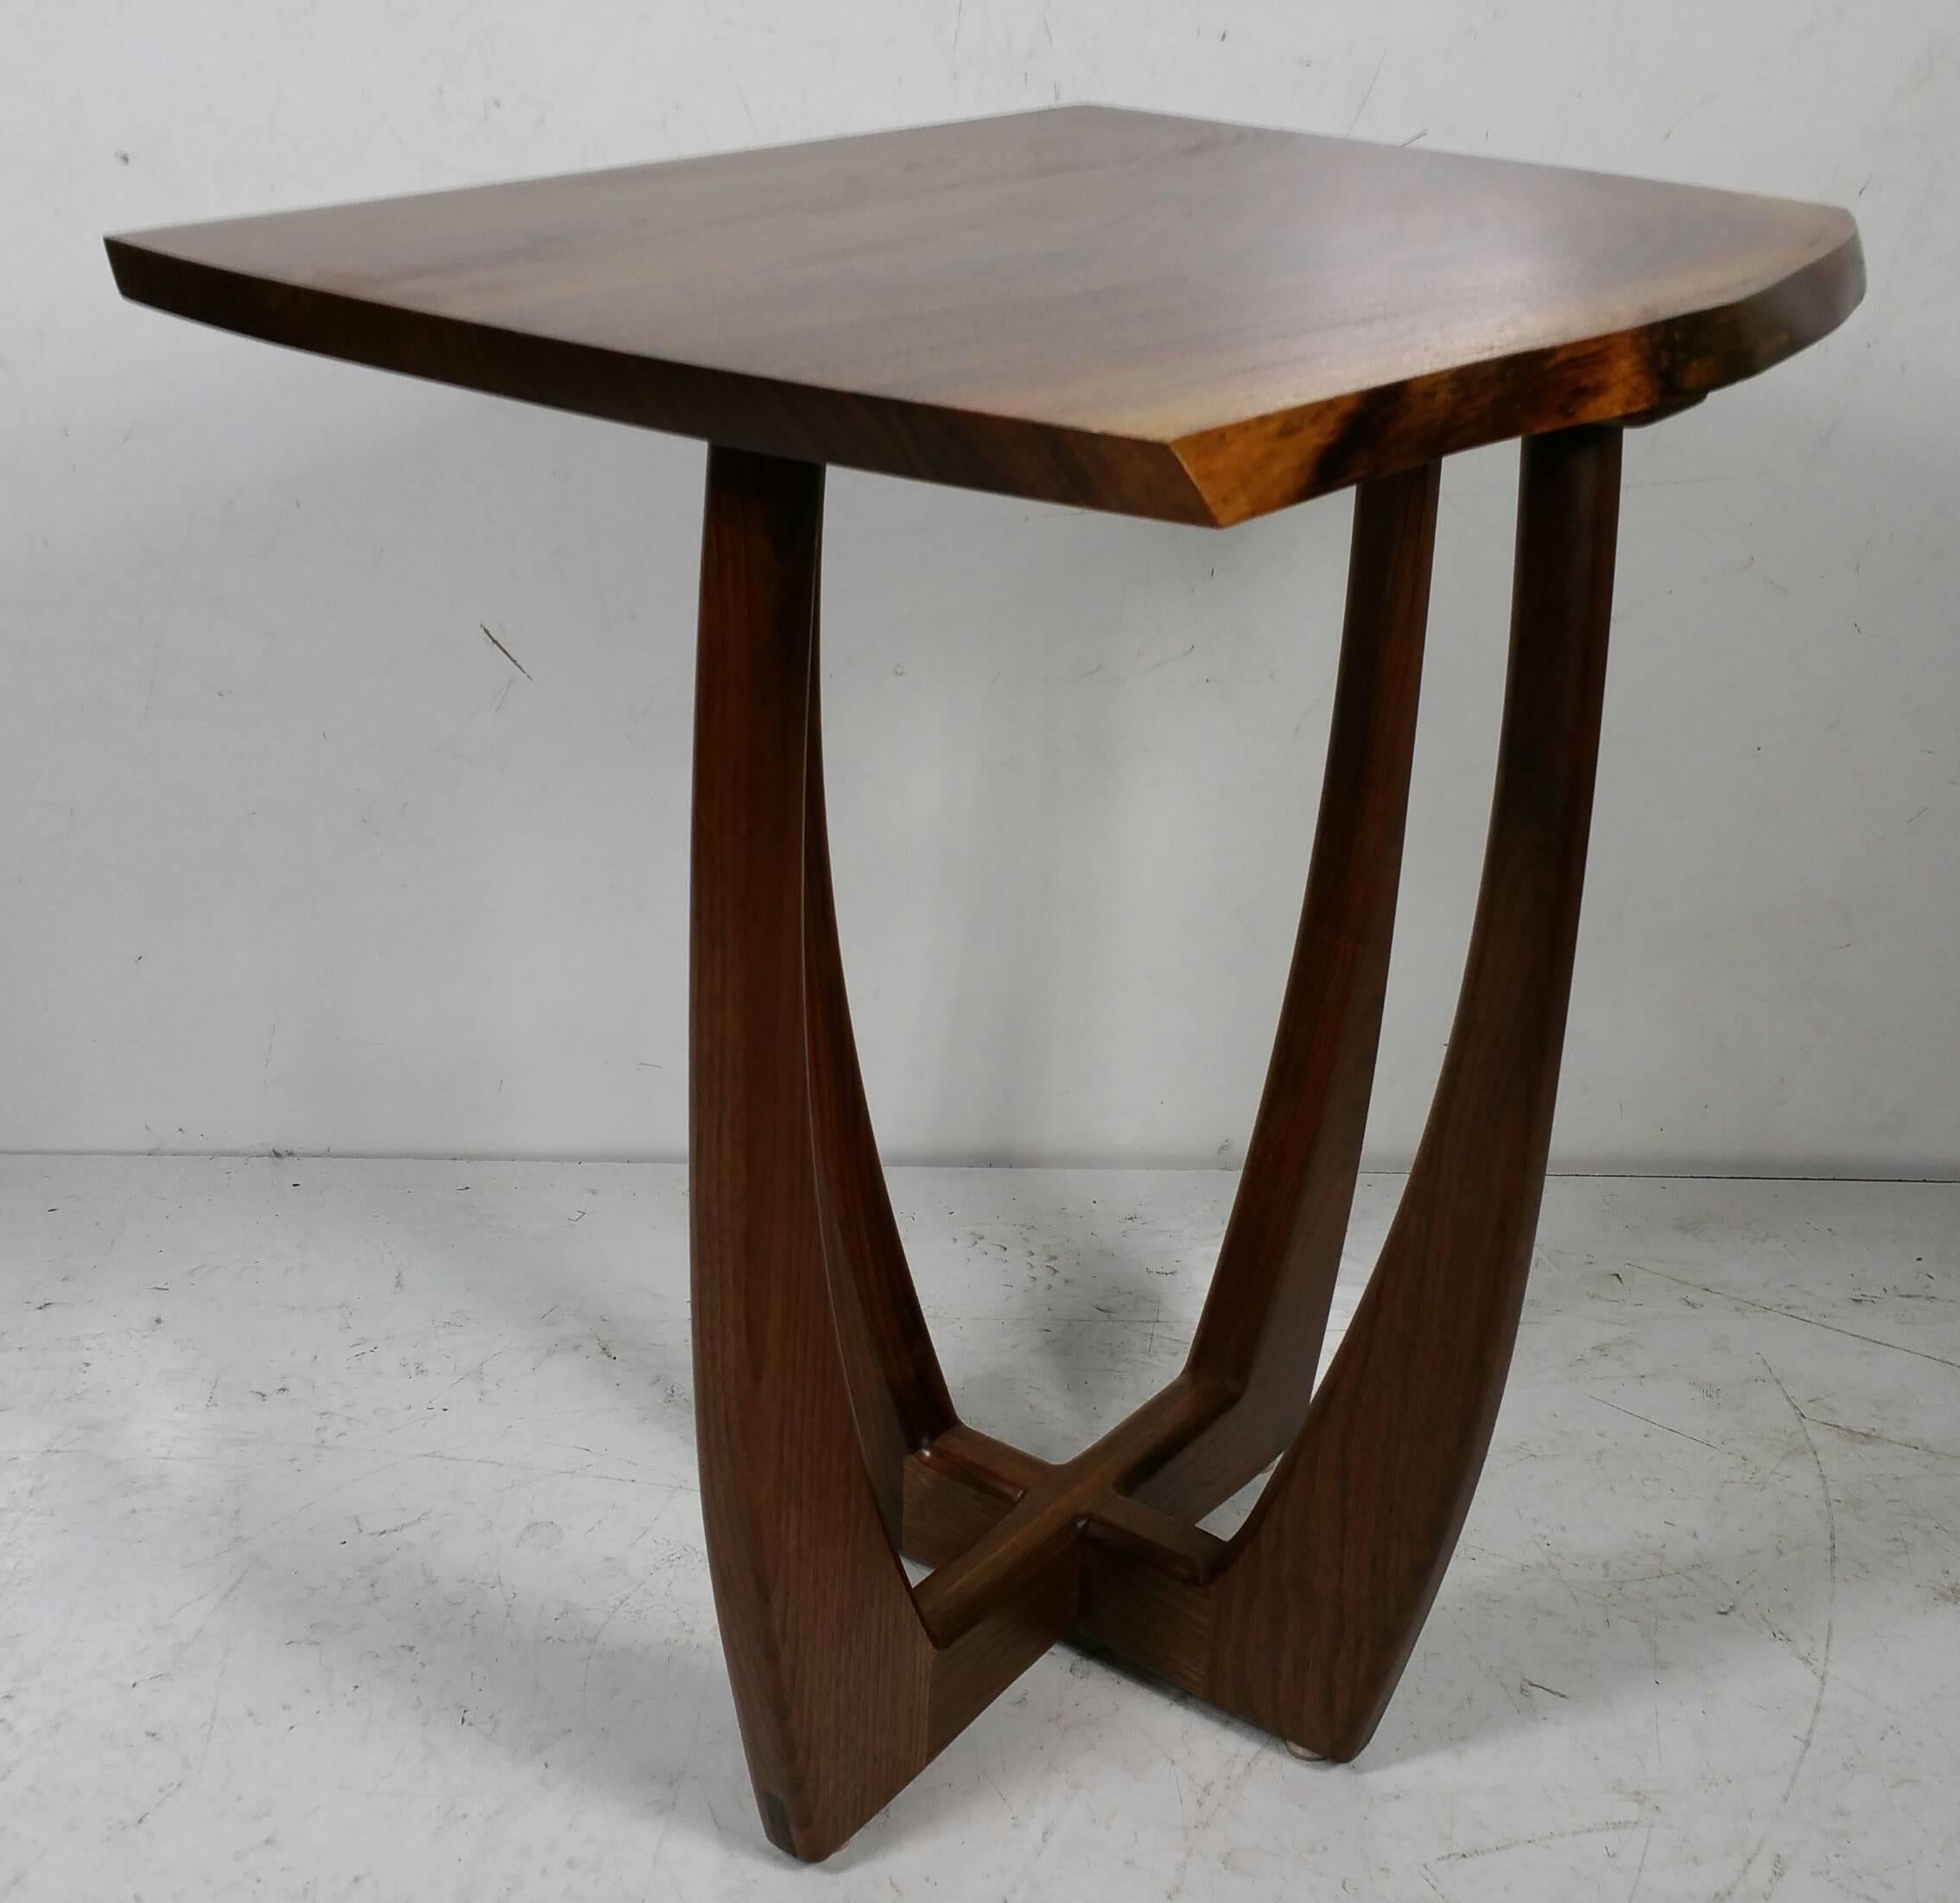 Hand-Crafted Modernist Free-Edge Table, Figured Walnut, Griff Logan For Sale